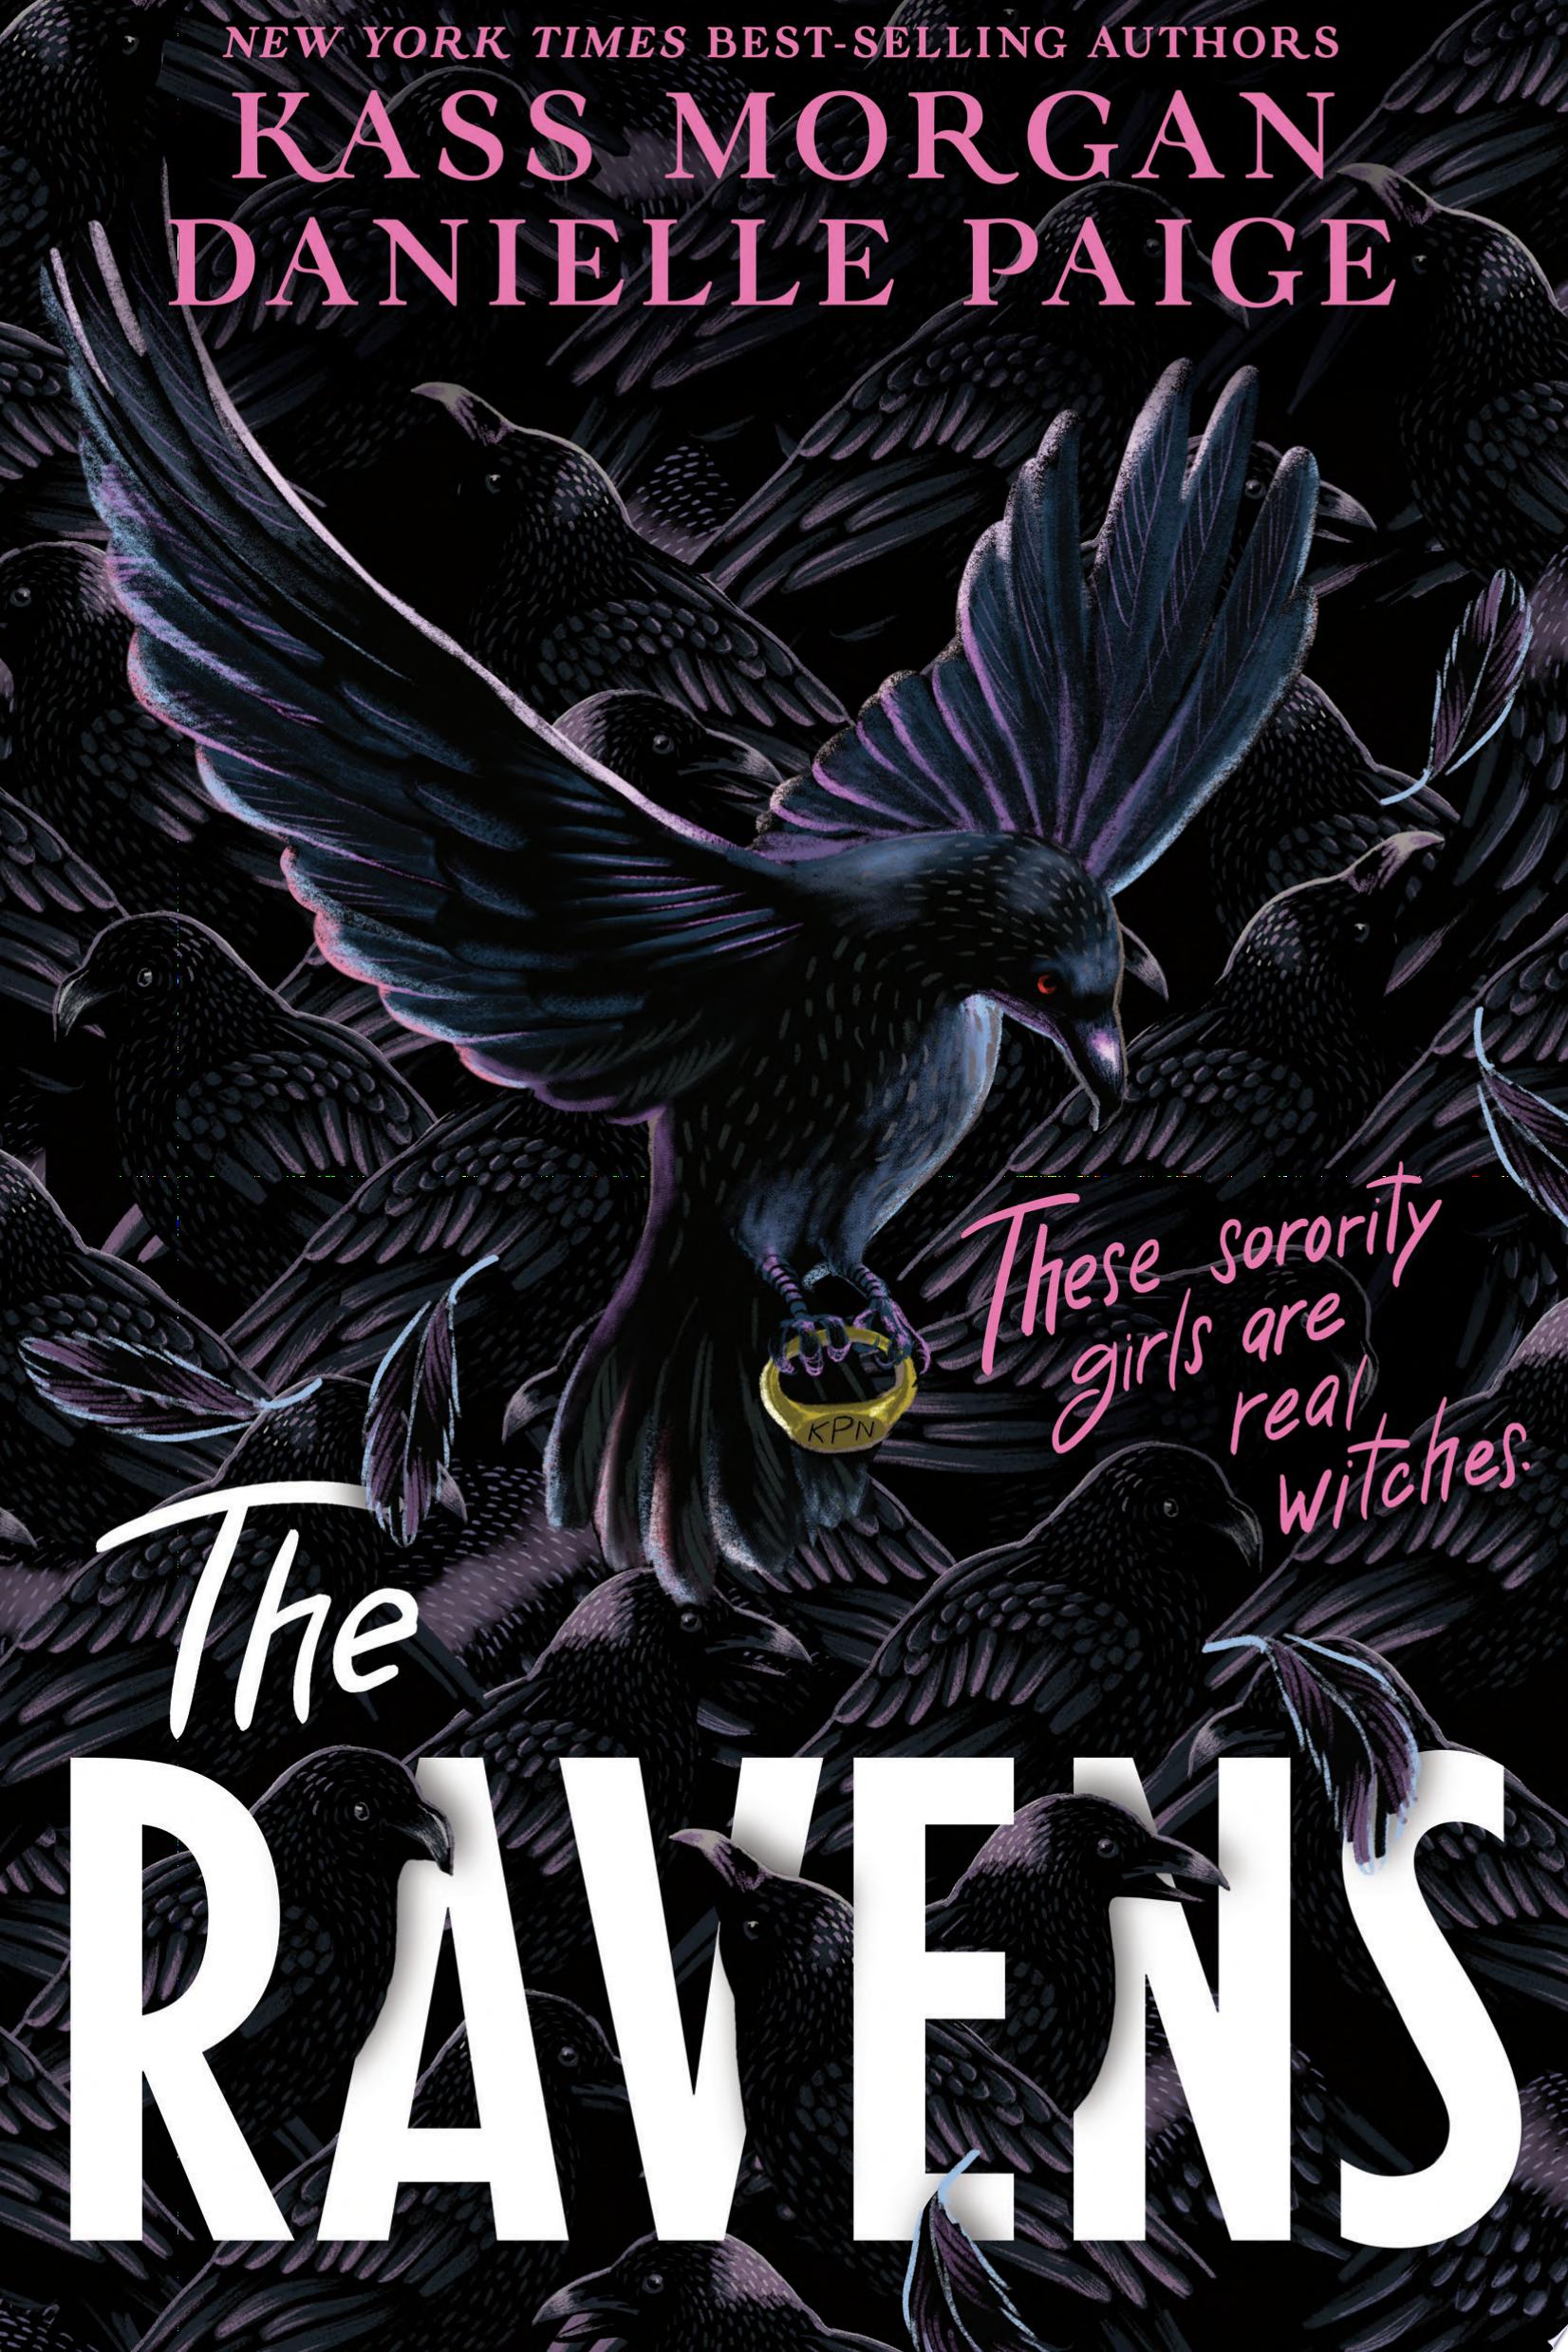 Image for "The Ravens"